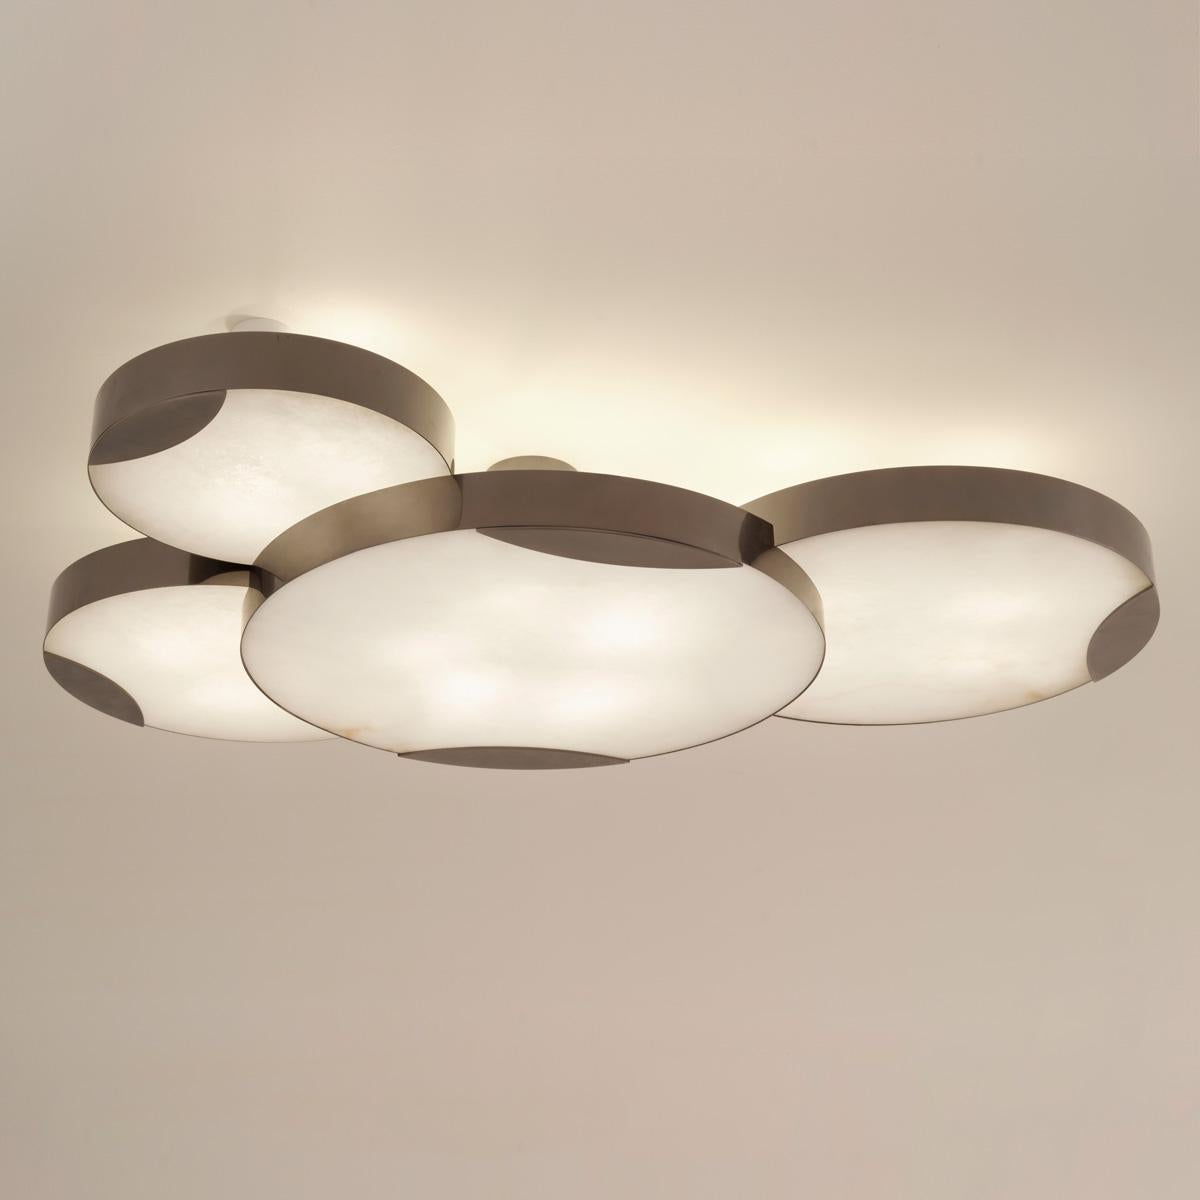 The Cloud N.4 ceiling light features four overlapping shades with large Tuscan alabaster diffusers providing an impressive amount of ambient light as well as up lighting. The shades are of different sizes as well as staggered, creating a highly